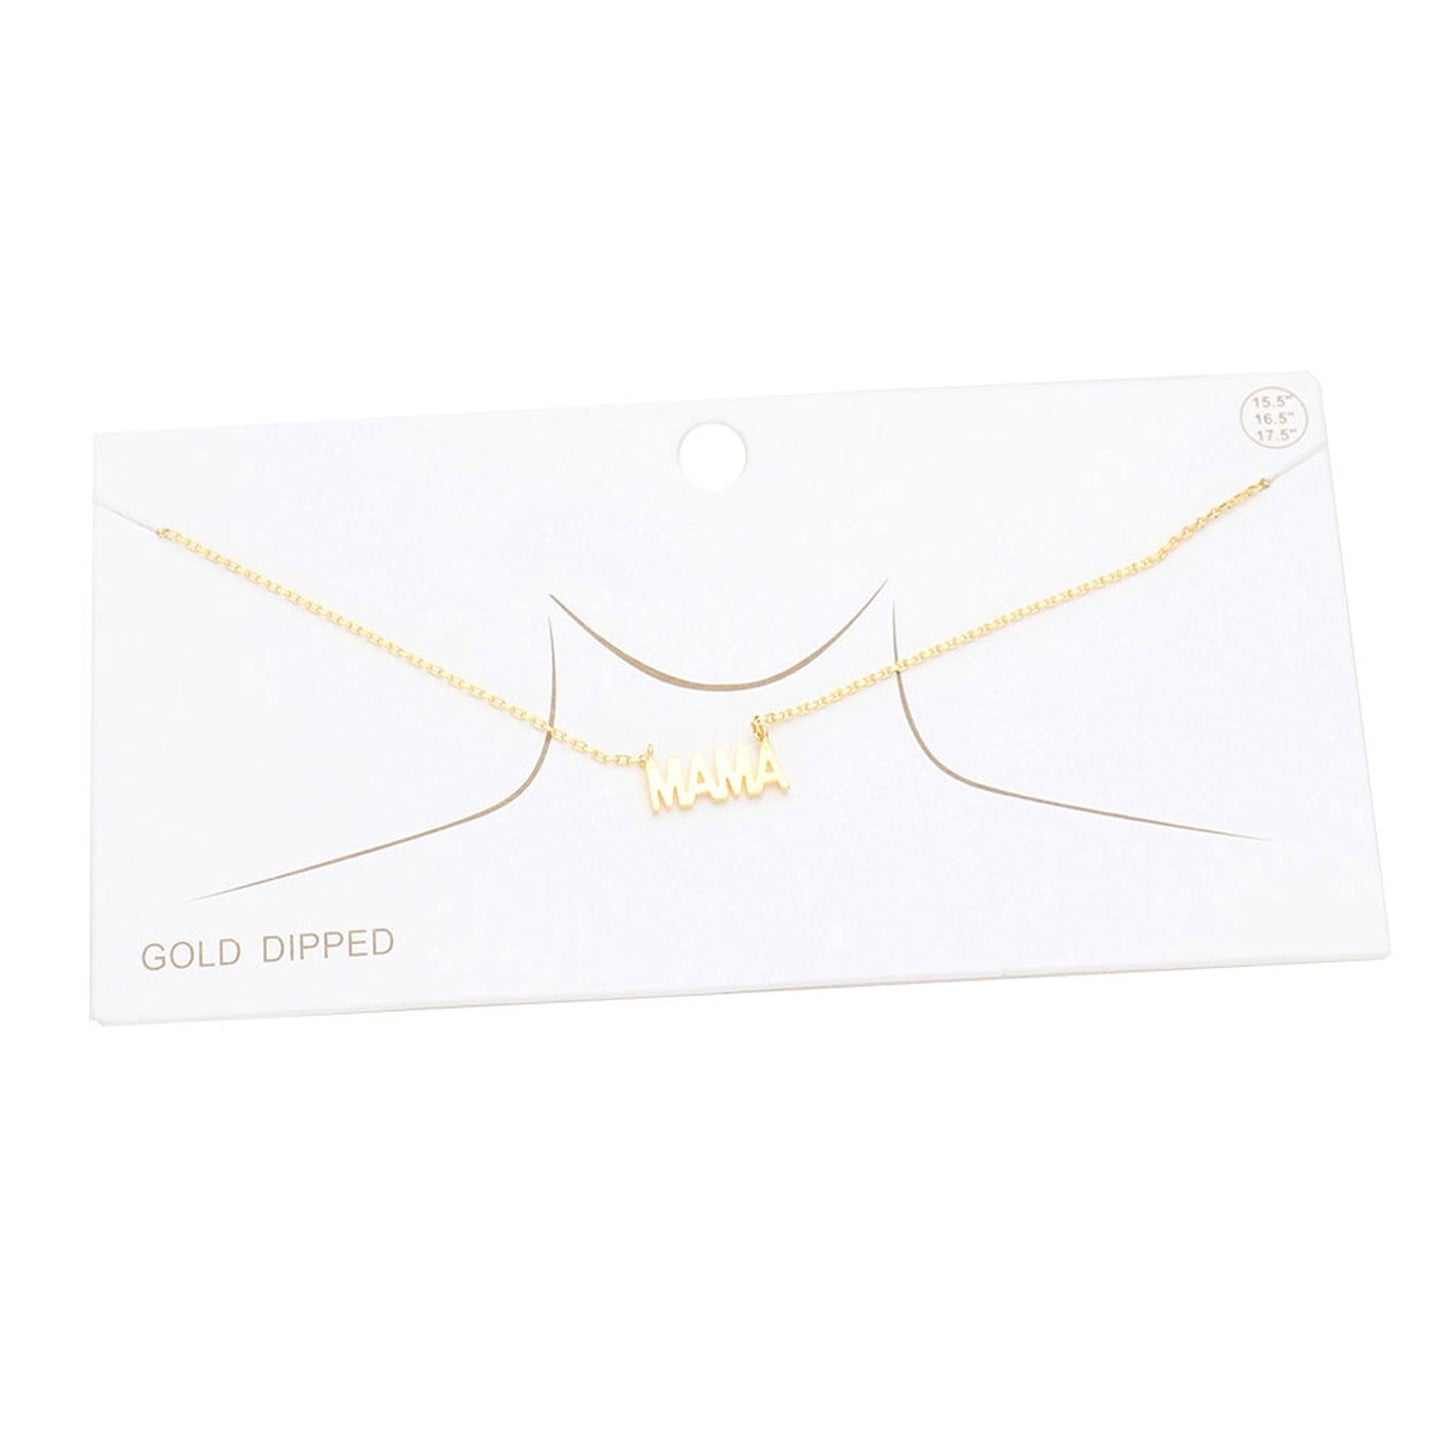 White Gold Dipped Metal MAMA Message Pendant Necklace. Get ready with these Necklace, put on a pop of color to complete your ensemble. This necklace makes your mom feel special ! Perfect for adding just the right amount of shimmer & shine and a touch of class to special events. This MAMA's necklace is perfect Mother's Day gift for all the special women in your life, be it mother, wife, sister or daughter.